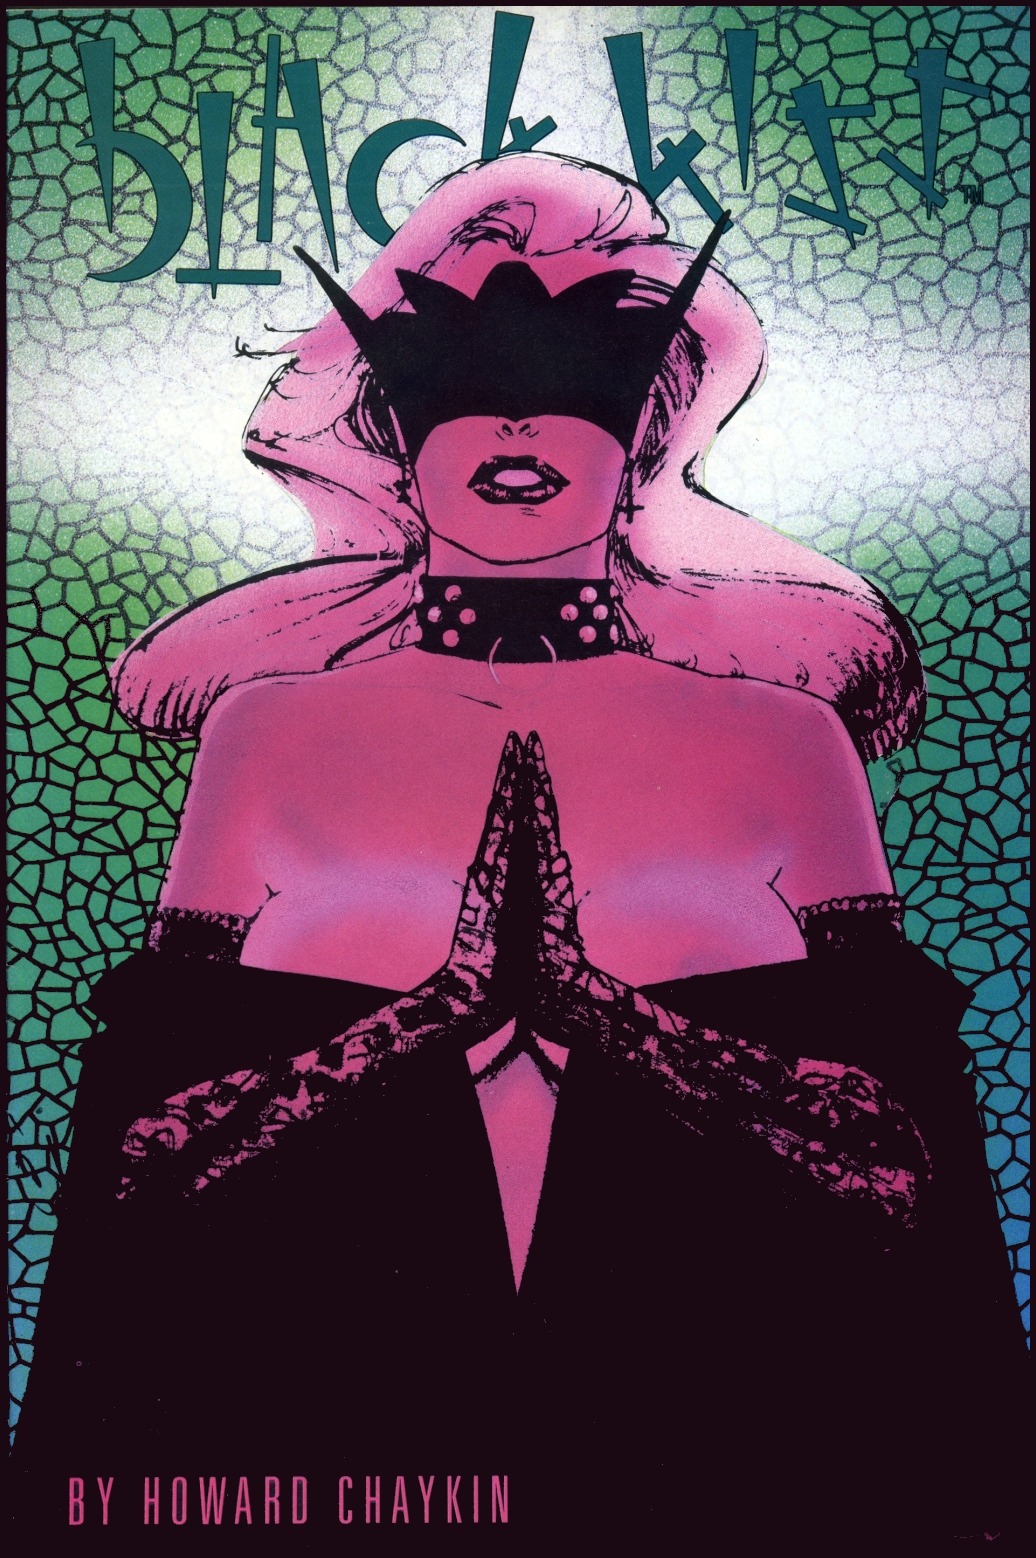 brianmichaelbendis:  The back end of BLACK KISS by Howard Chaykin